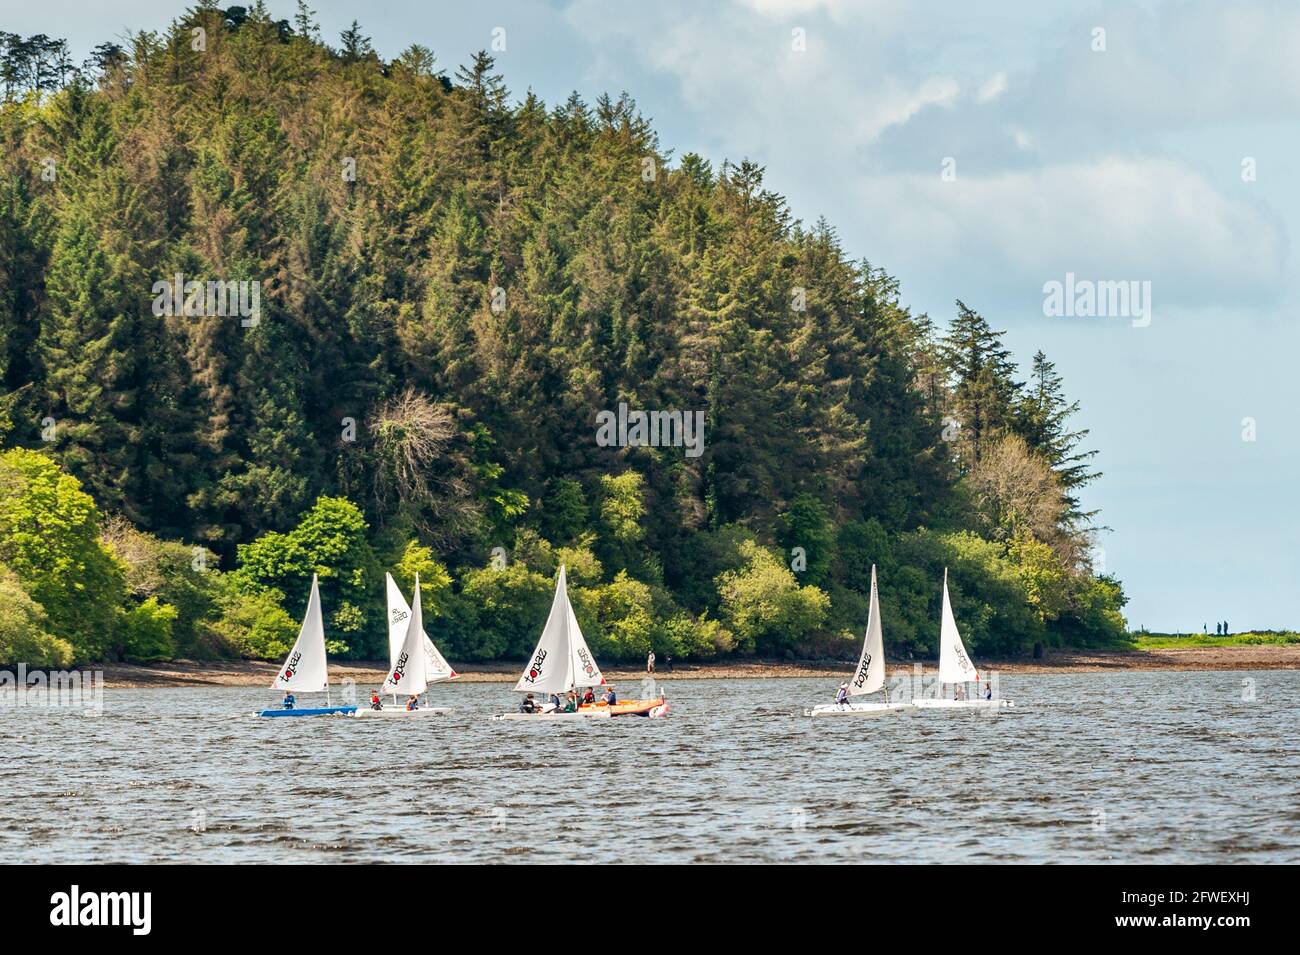 Bantry, West Cork, Ireland. 22nd May, 2021. The sun shone on Bantry this morning with many locals and visitors taking full advantage of the good weather. Bantry Bay Sailing Club's Saturday morning sailing session attracted many sailors. Credit: AG News/Alamy Live News Stock Photo